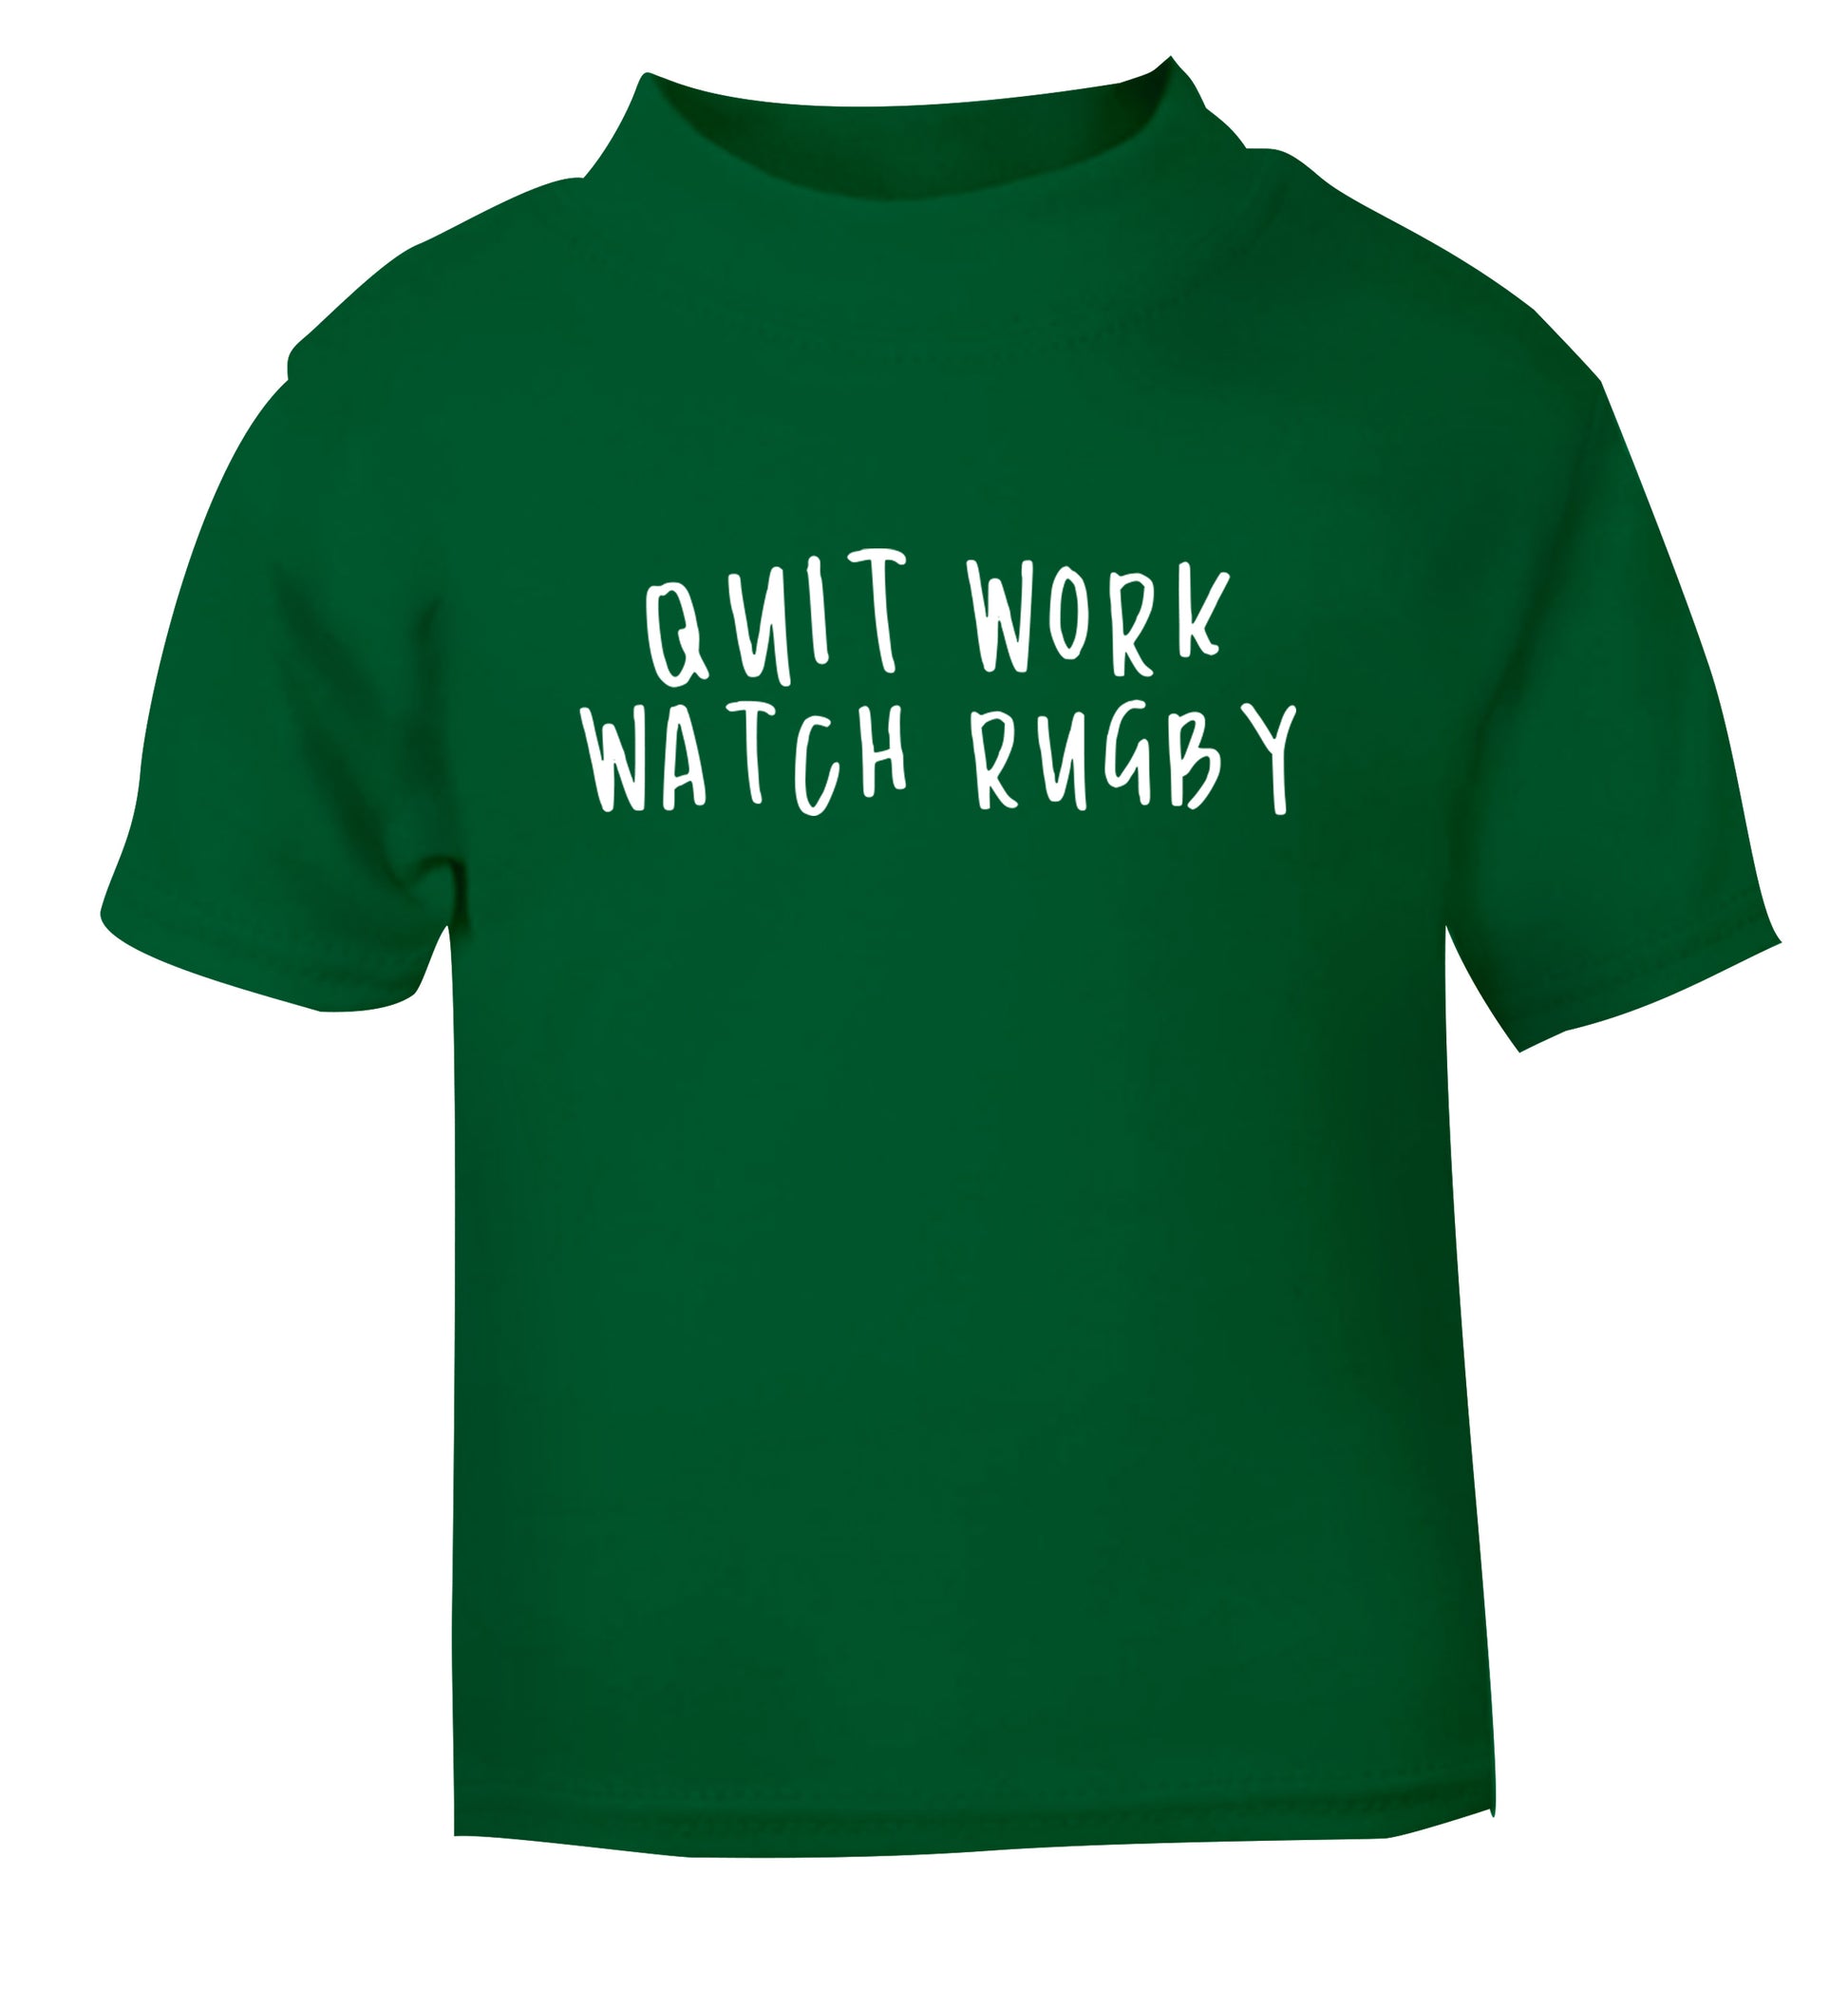 Quit work watch rugby green Baby Toddler Tshirt 2 Years